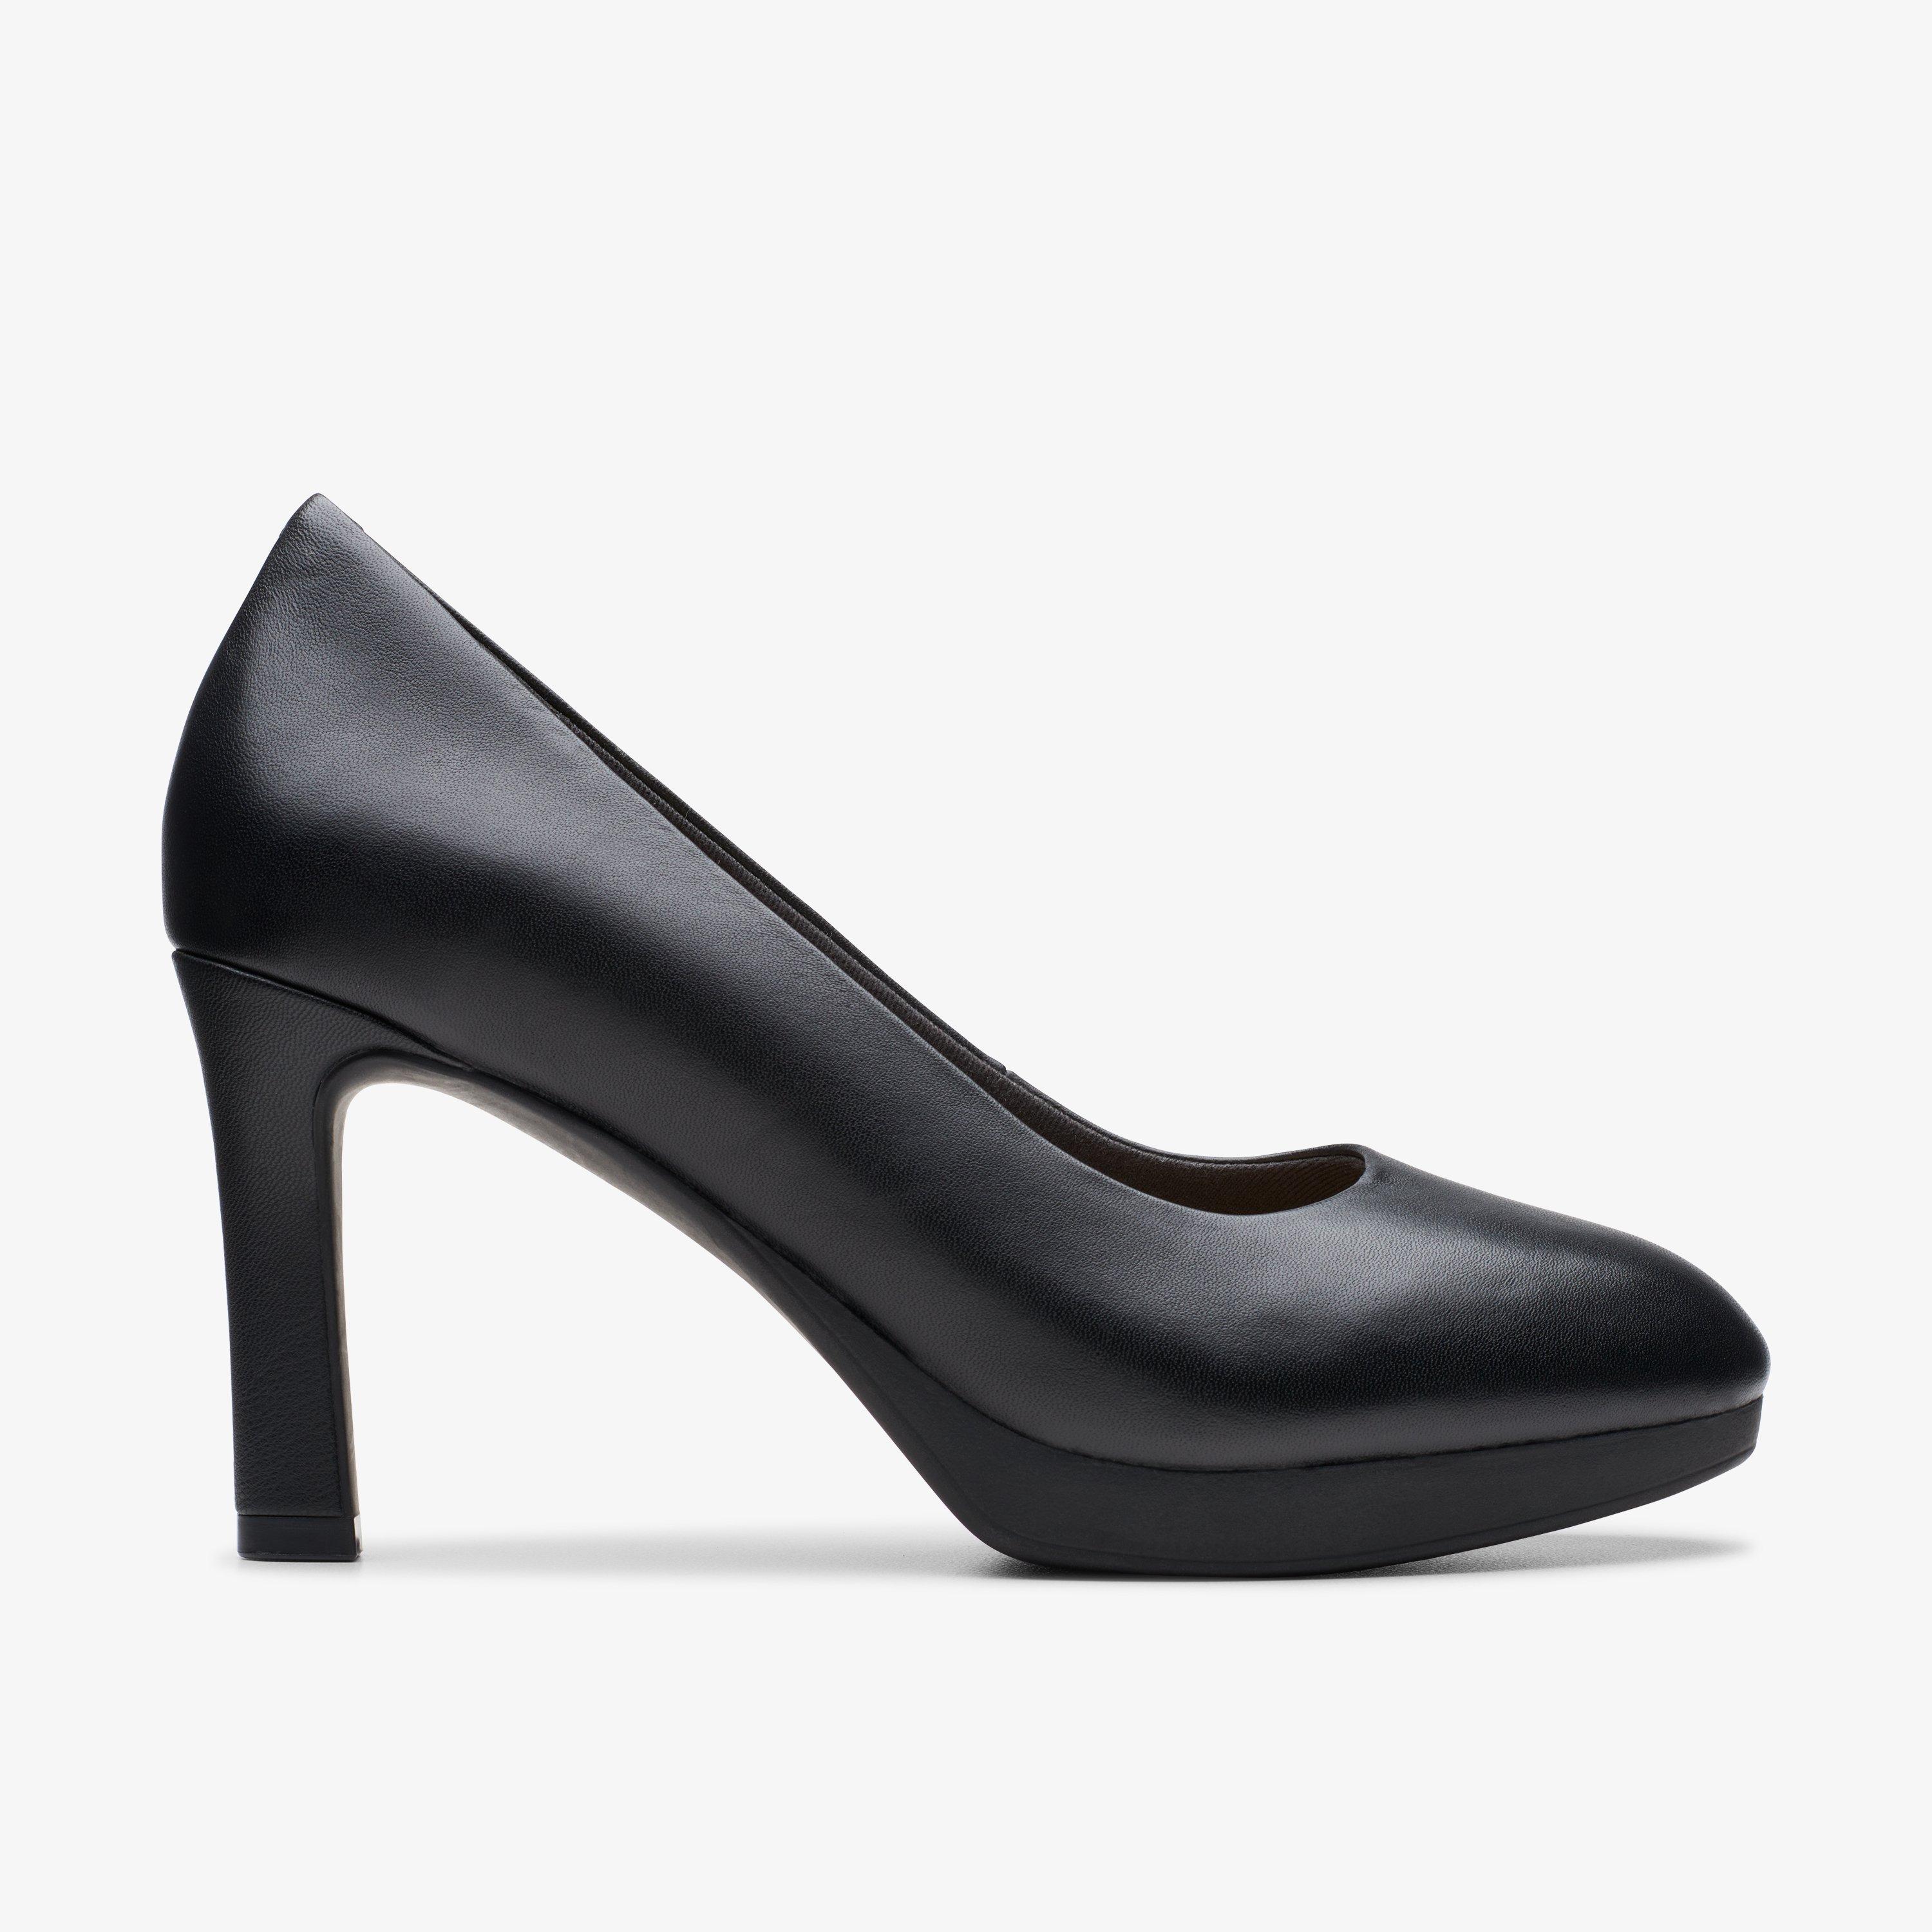 Women's Workwear Shoes - Everyday Office Shoes & Heels